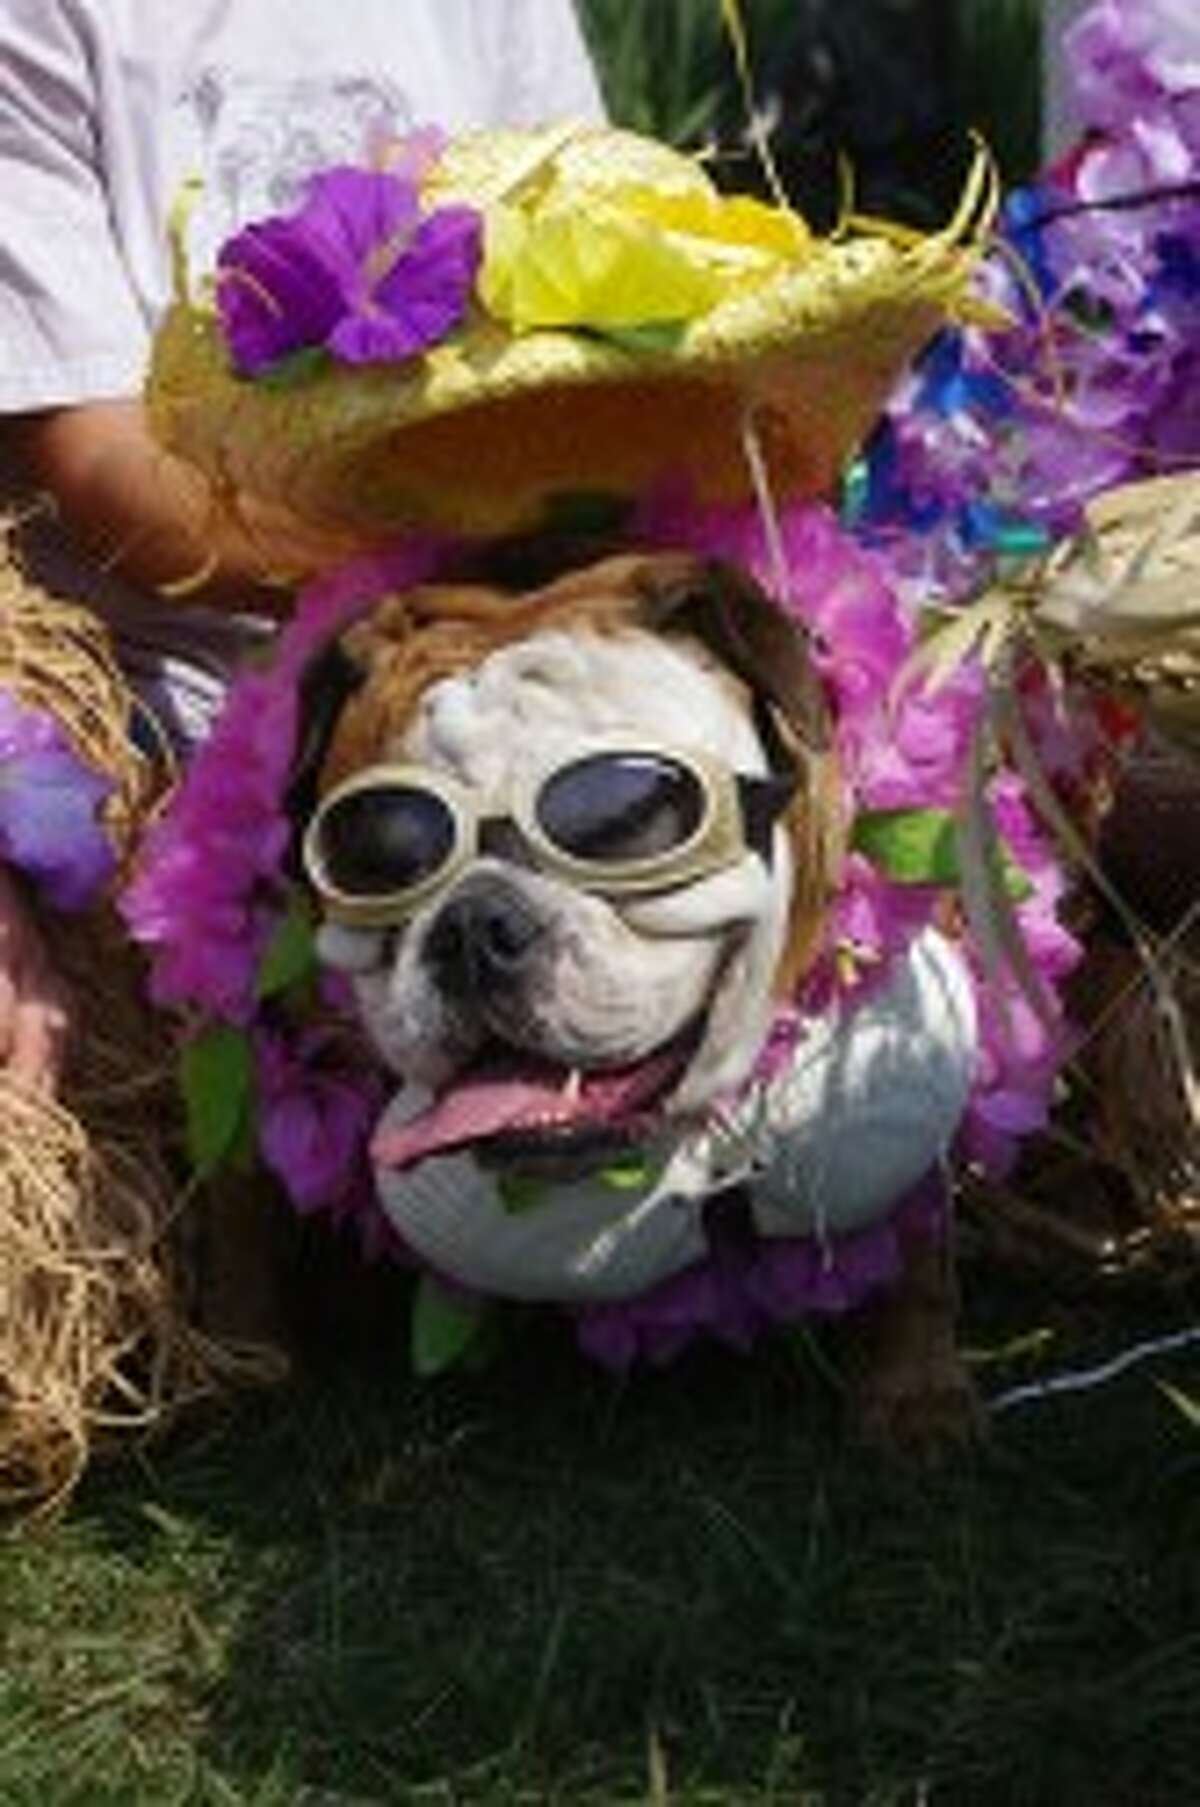 This bulldog won the costume contest in the 2012 Blessing of the Animals at Circle Rocking S Children's Farm. (News Advocate File Photo)